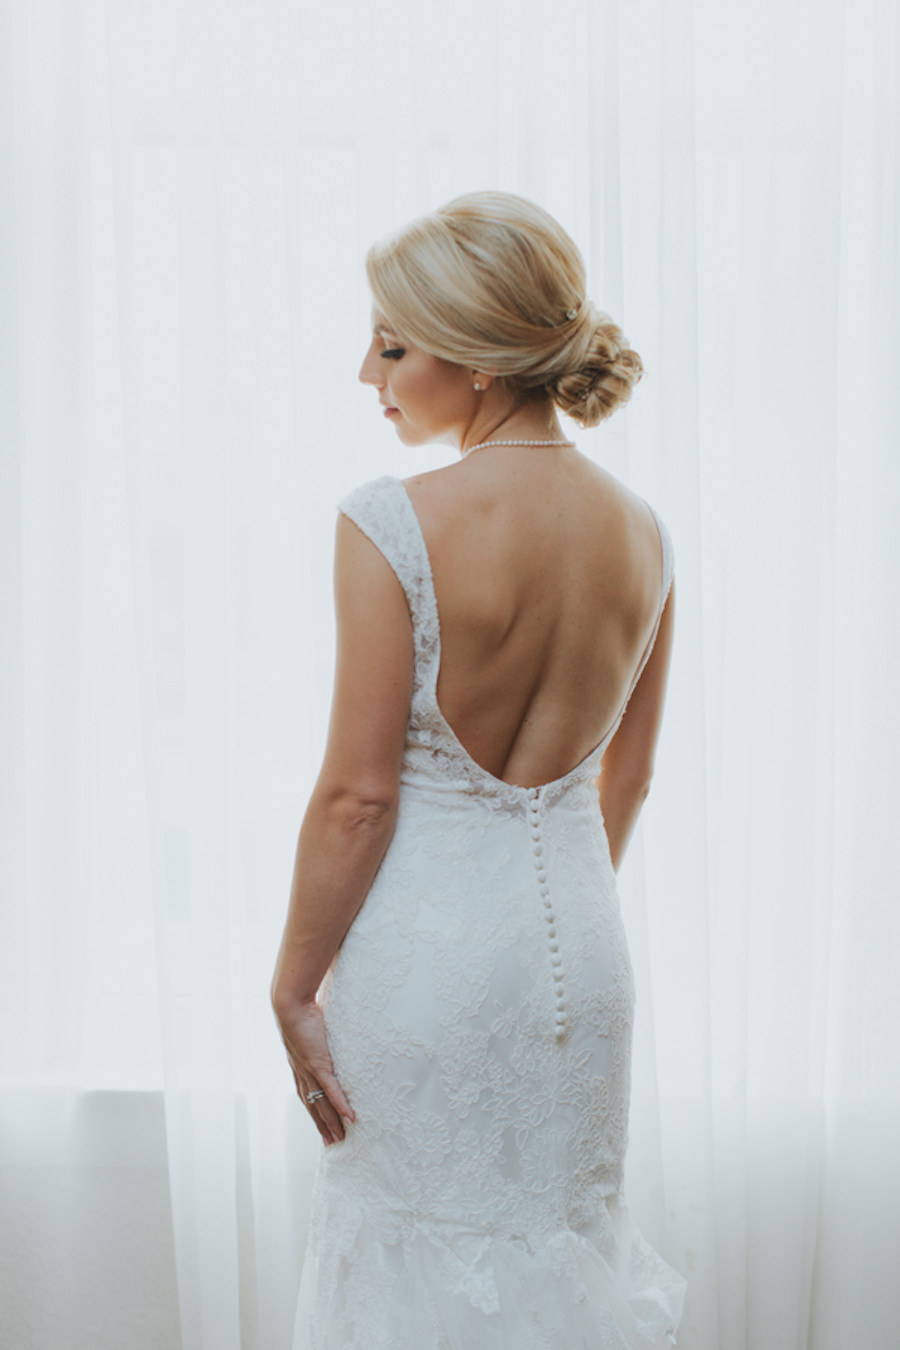 Bride Wedding Portrait in Low Back, Lace, Ivory, Allure Wedding Dress with Button up Back